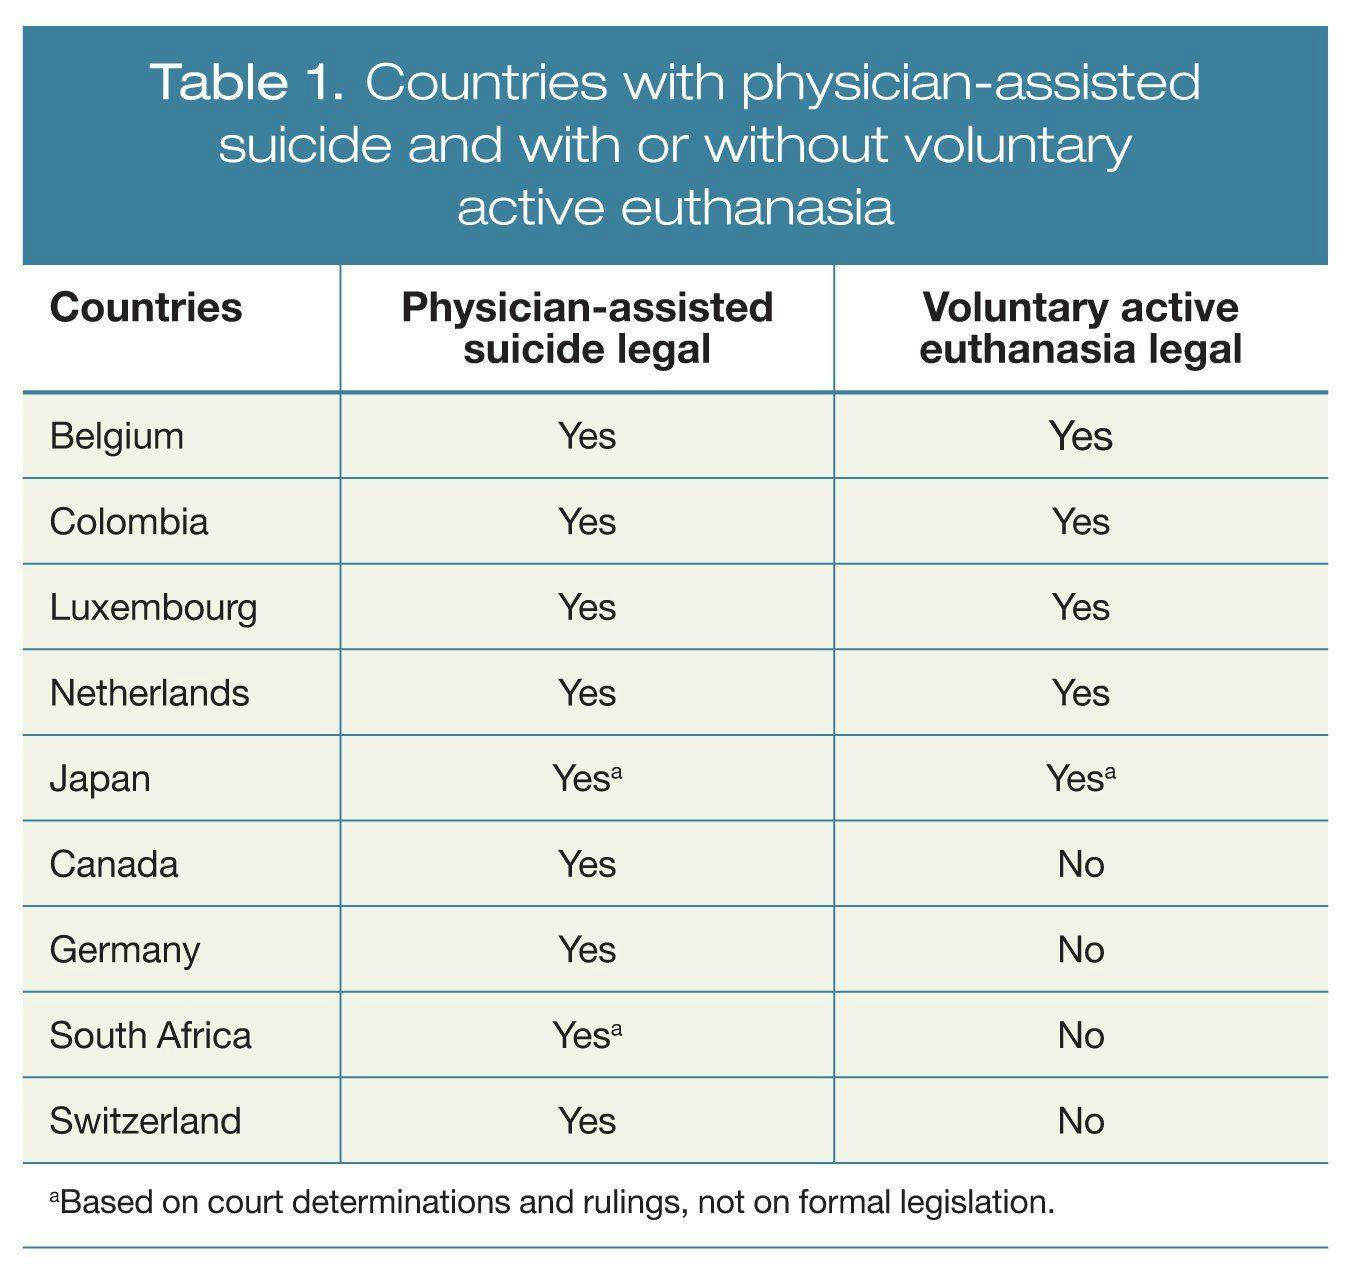 Countries with physician-assisted suicide & with/without voluntary euthanasia